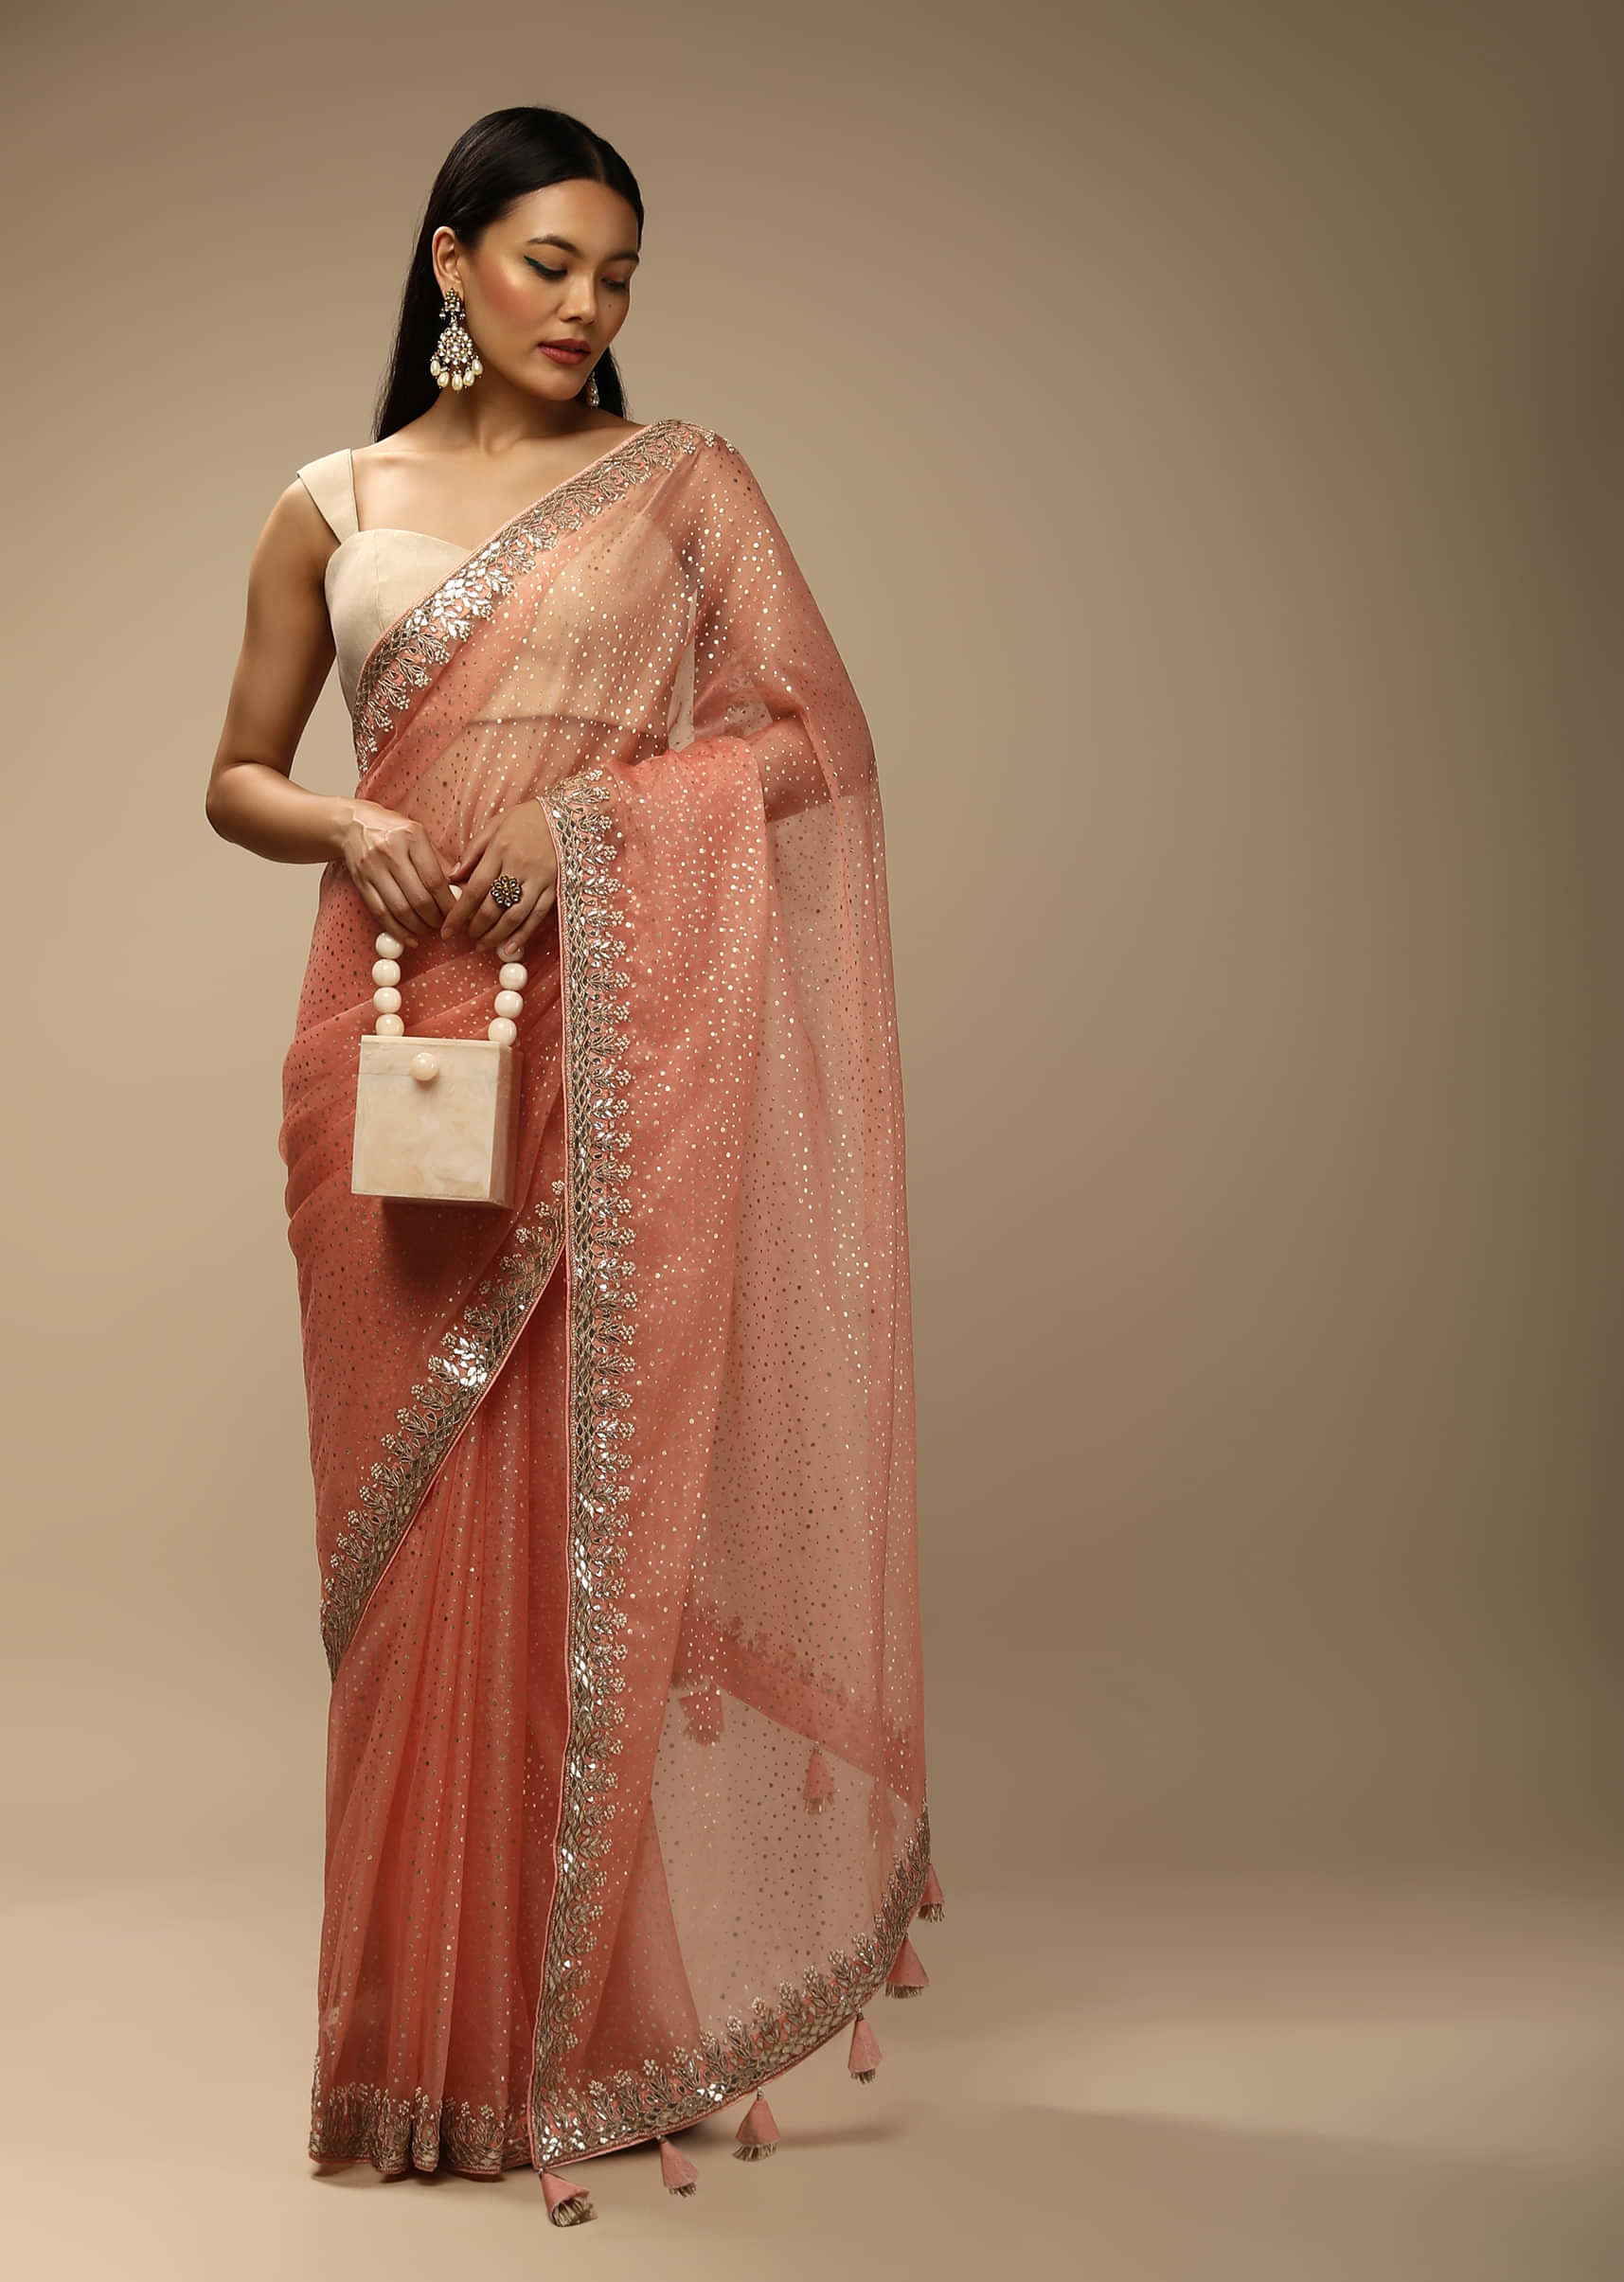 Peach Saree In Organza With Foil Printed Scattered Dots And Gotta Embroidered Border